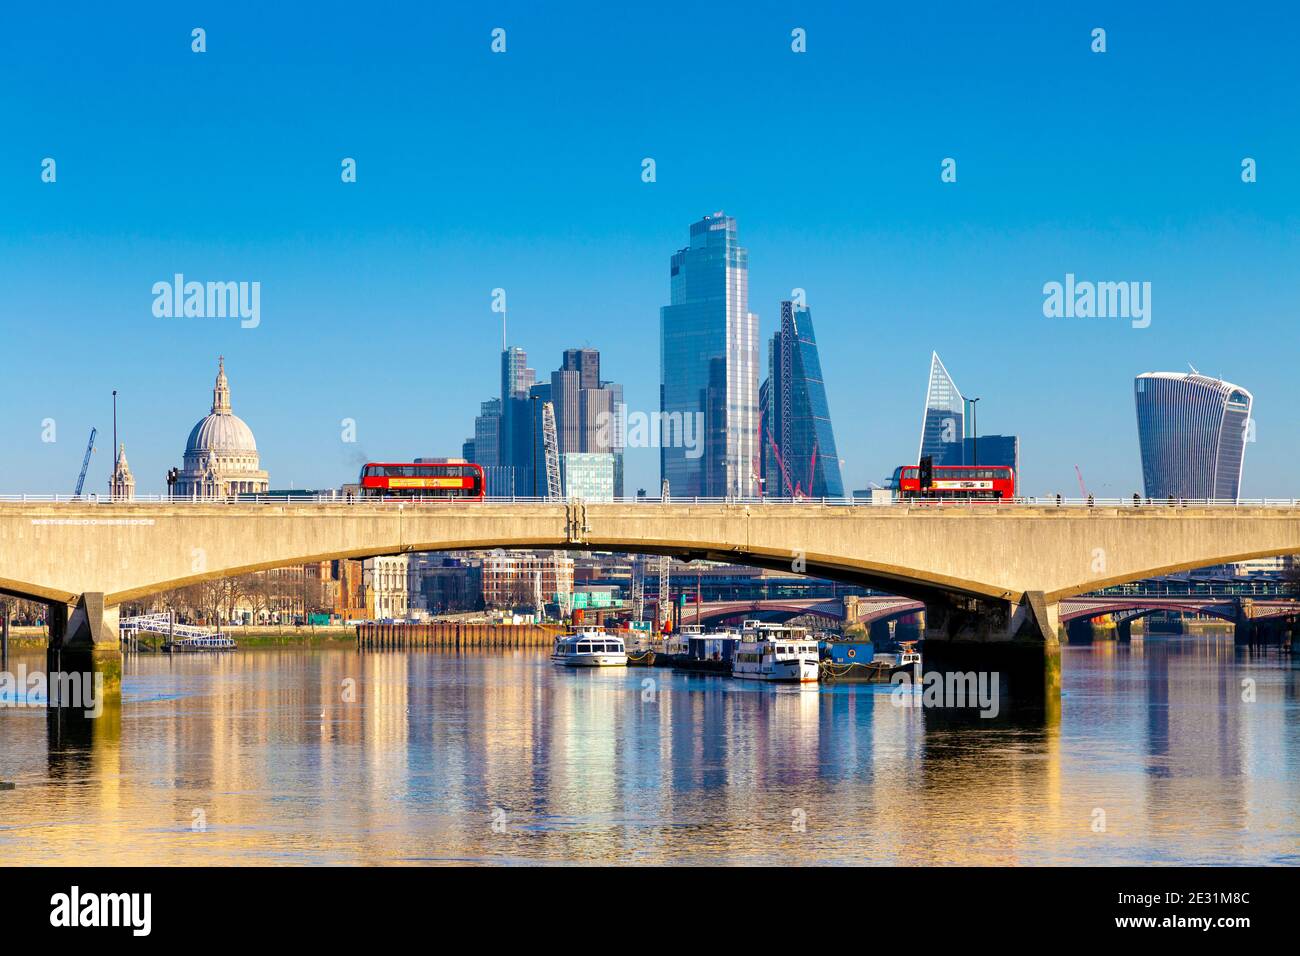 Red double decker buses crossing the Waterloo Bridge over the Thames river, London, UK Stock Photo